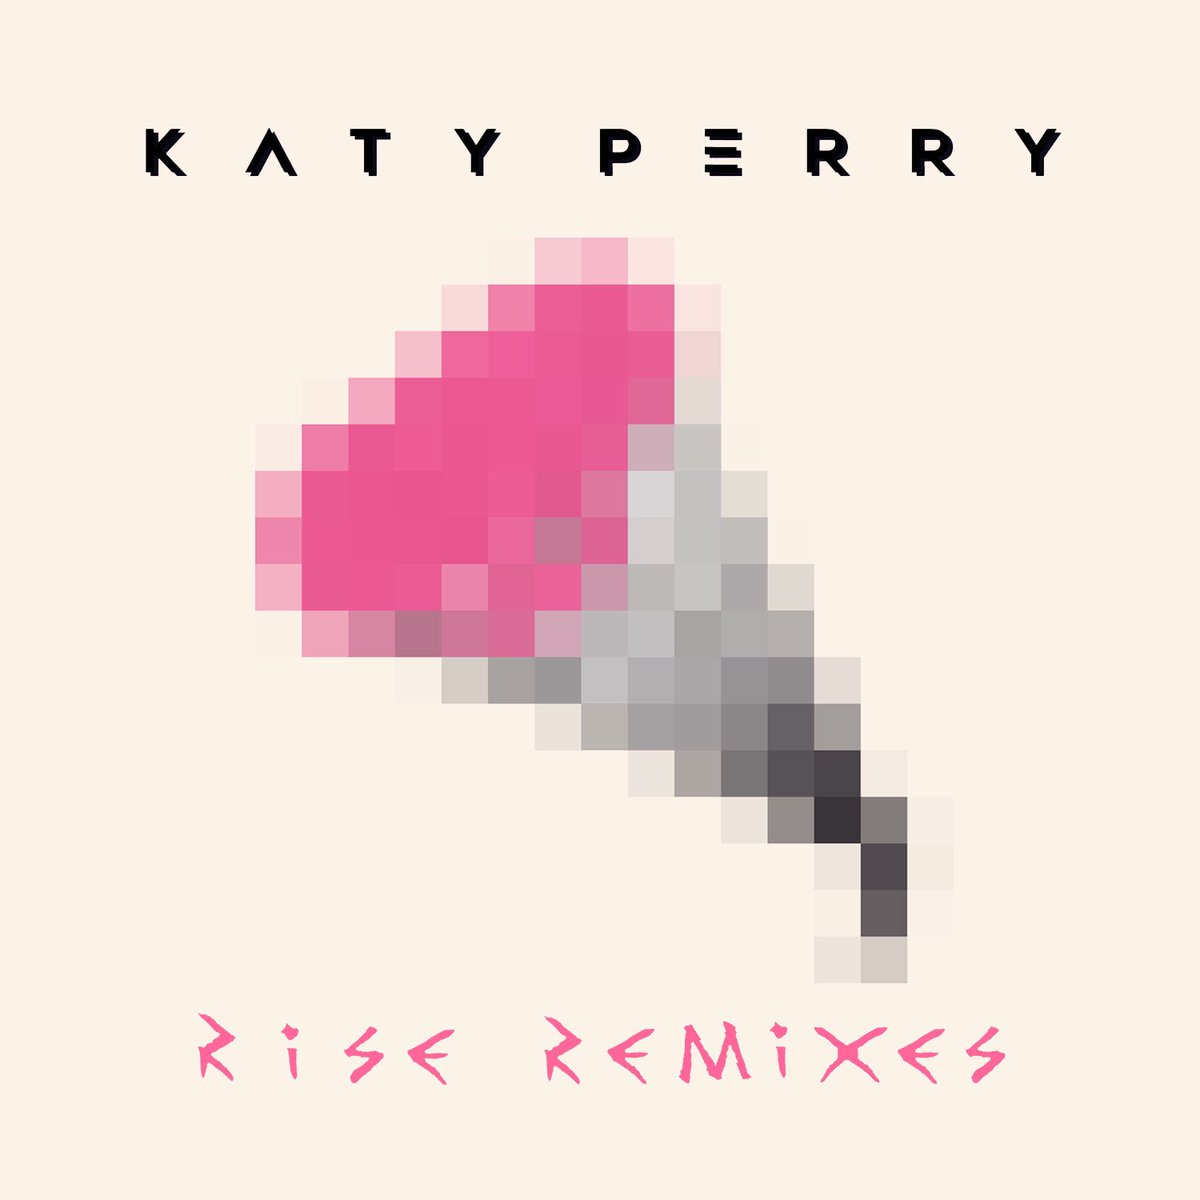 For your freakin weekend: #RISE REMIXES BY @PURITY_RING, @MonsieurAdi & @TALAOFFICIAL https://t.co/QRbWiqNN8i???????????????????? https://t.co/Q8PUkNoqwc